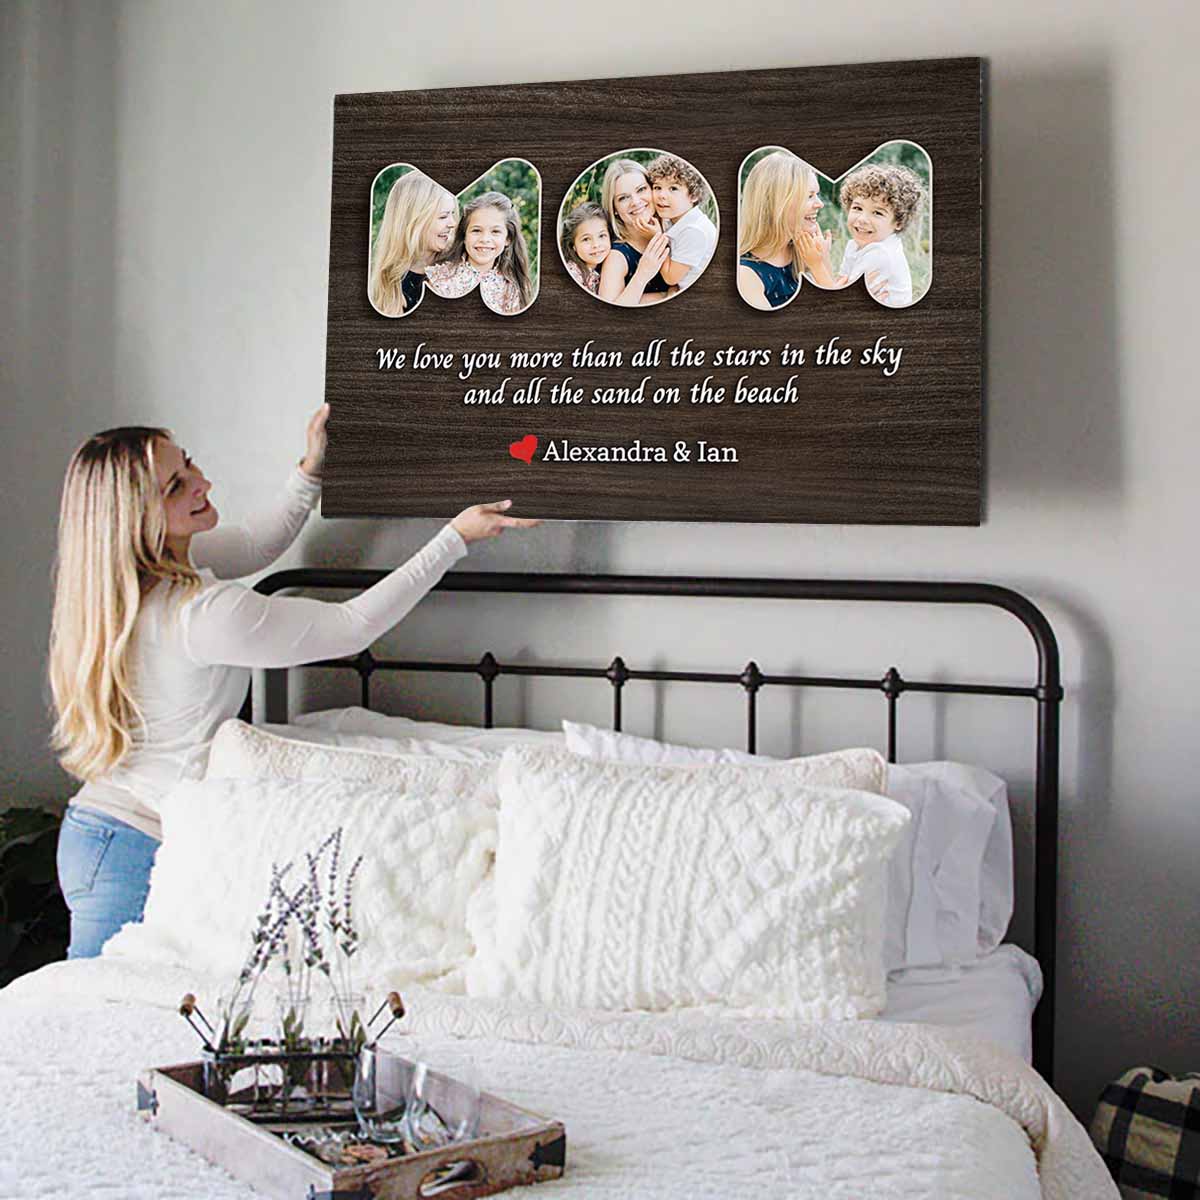 We Love You Custom Photo Canvas for Mom Dad